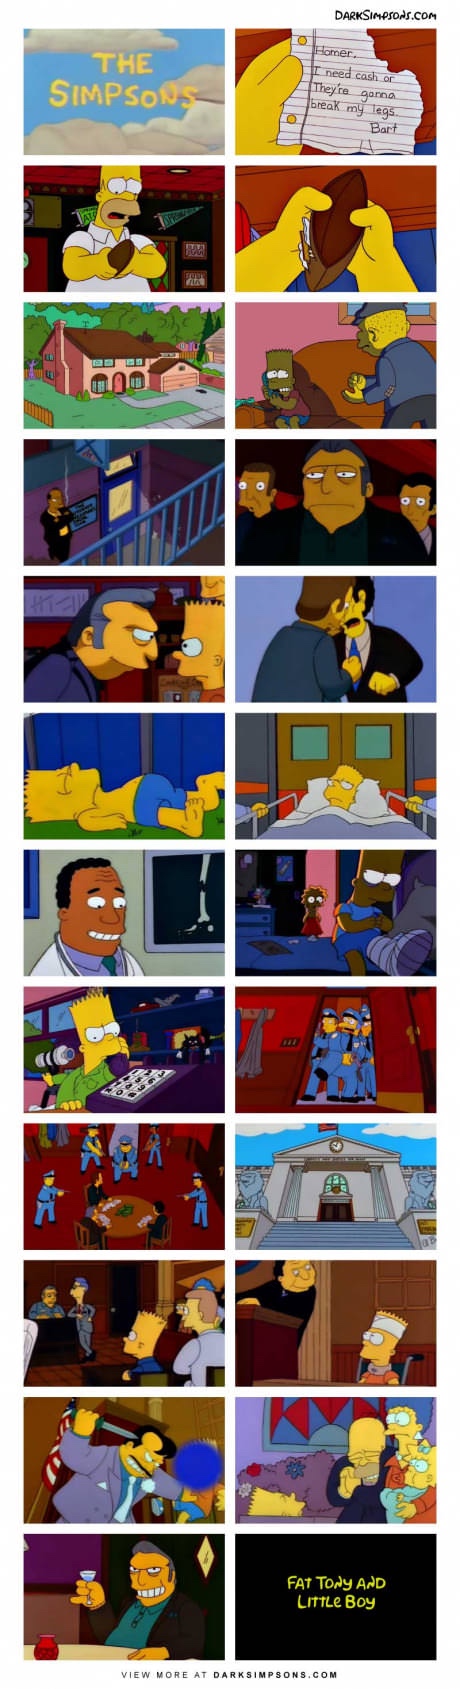 meme - simpsons fat tony - Darksimpsons.Com The Simpson Homer. I need cash or They're gonna break my legs Bart a Lo be Fat Tony And Little Boy View More At Darksimpsons.Com